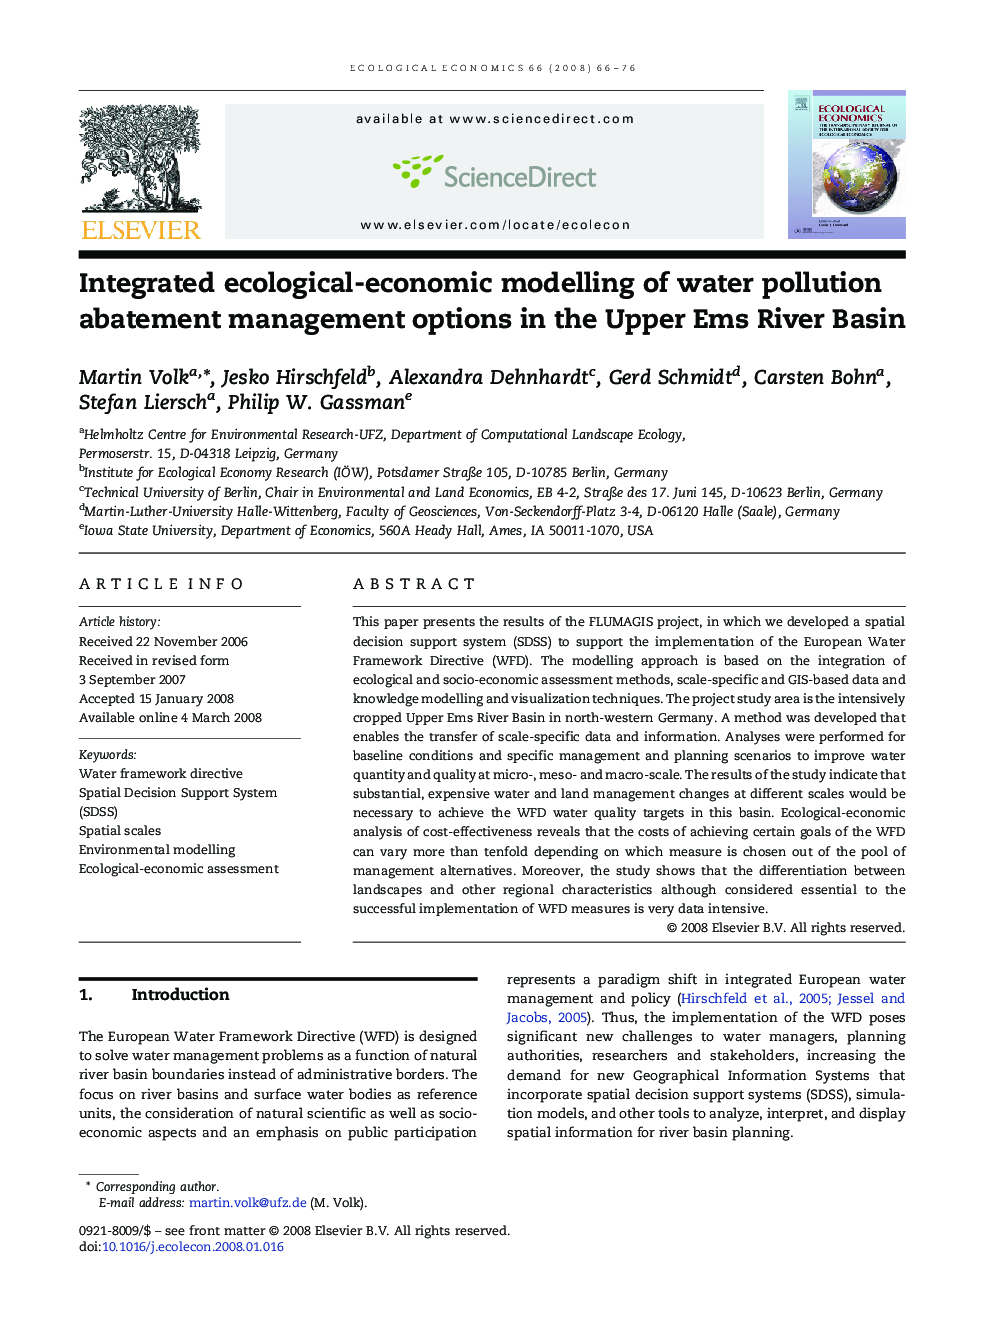 Integrated ecological-economic modelling of water pollution abatement management options in the Upper Ems River Basin